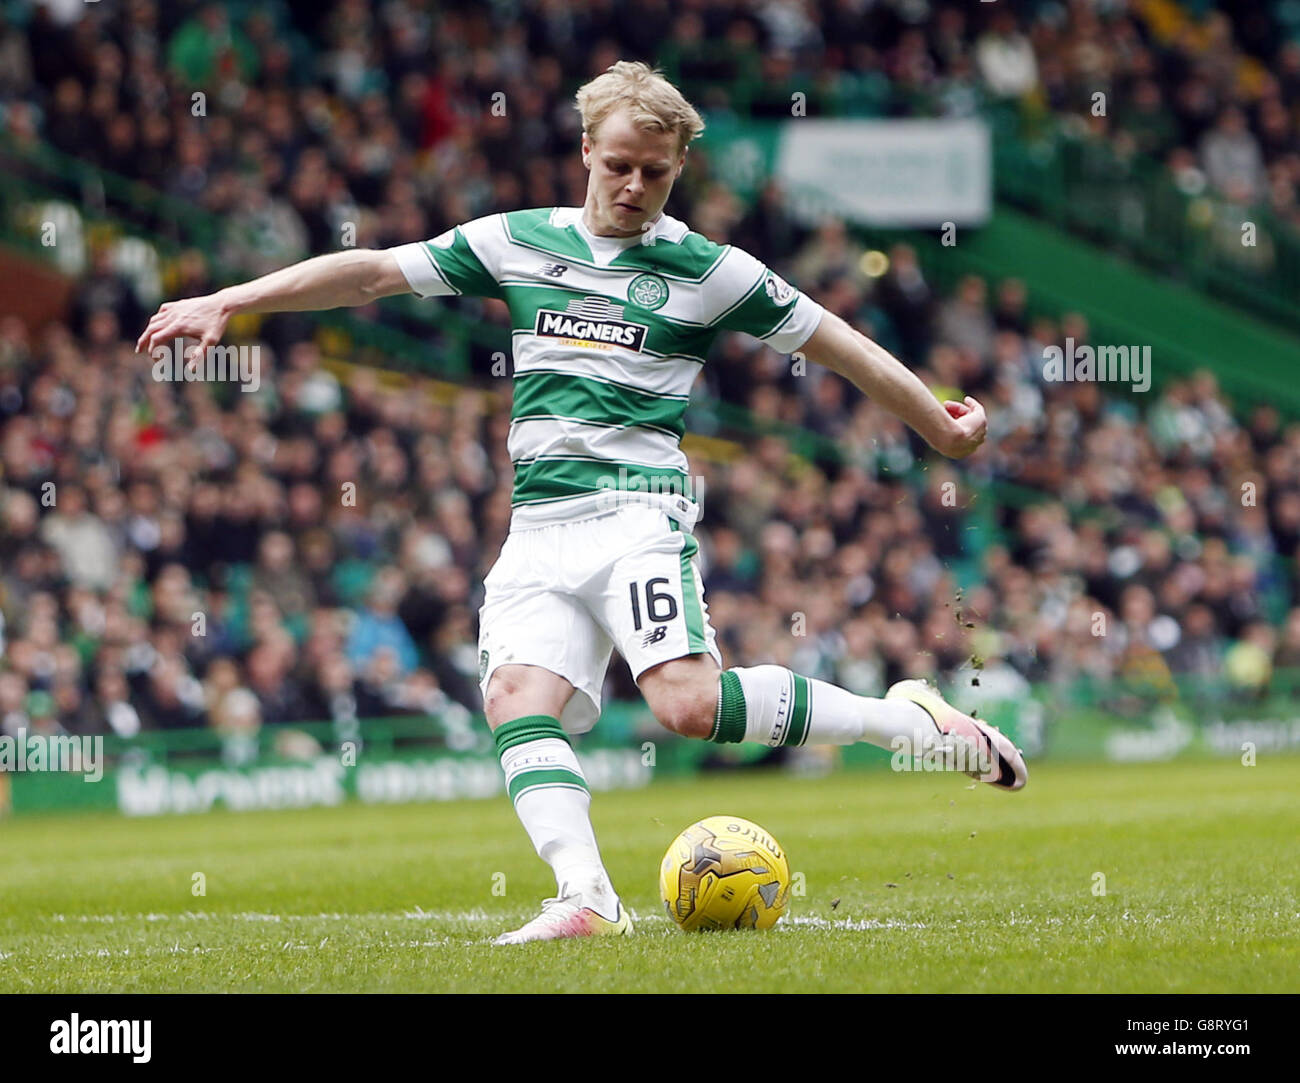 Celtic's Gary Mackay-Steven scores his sides first goal during the Ladbrokes Scottish Premiership match at Celtic Park, Glasgow. Stock Photo